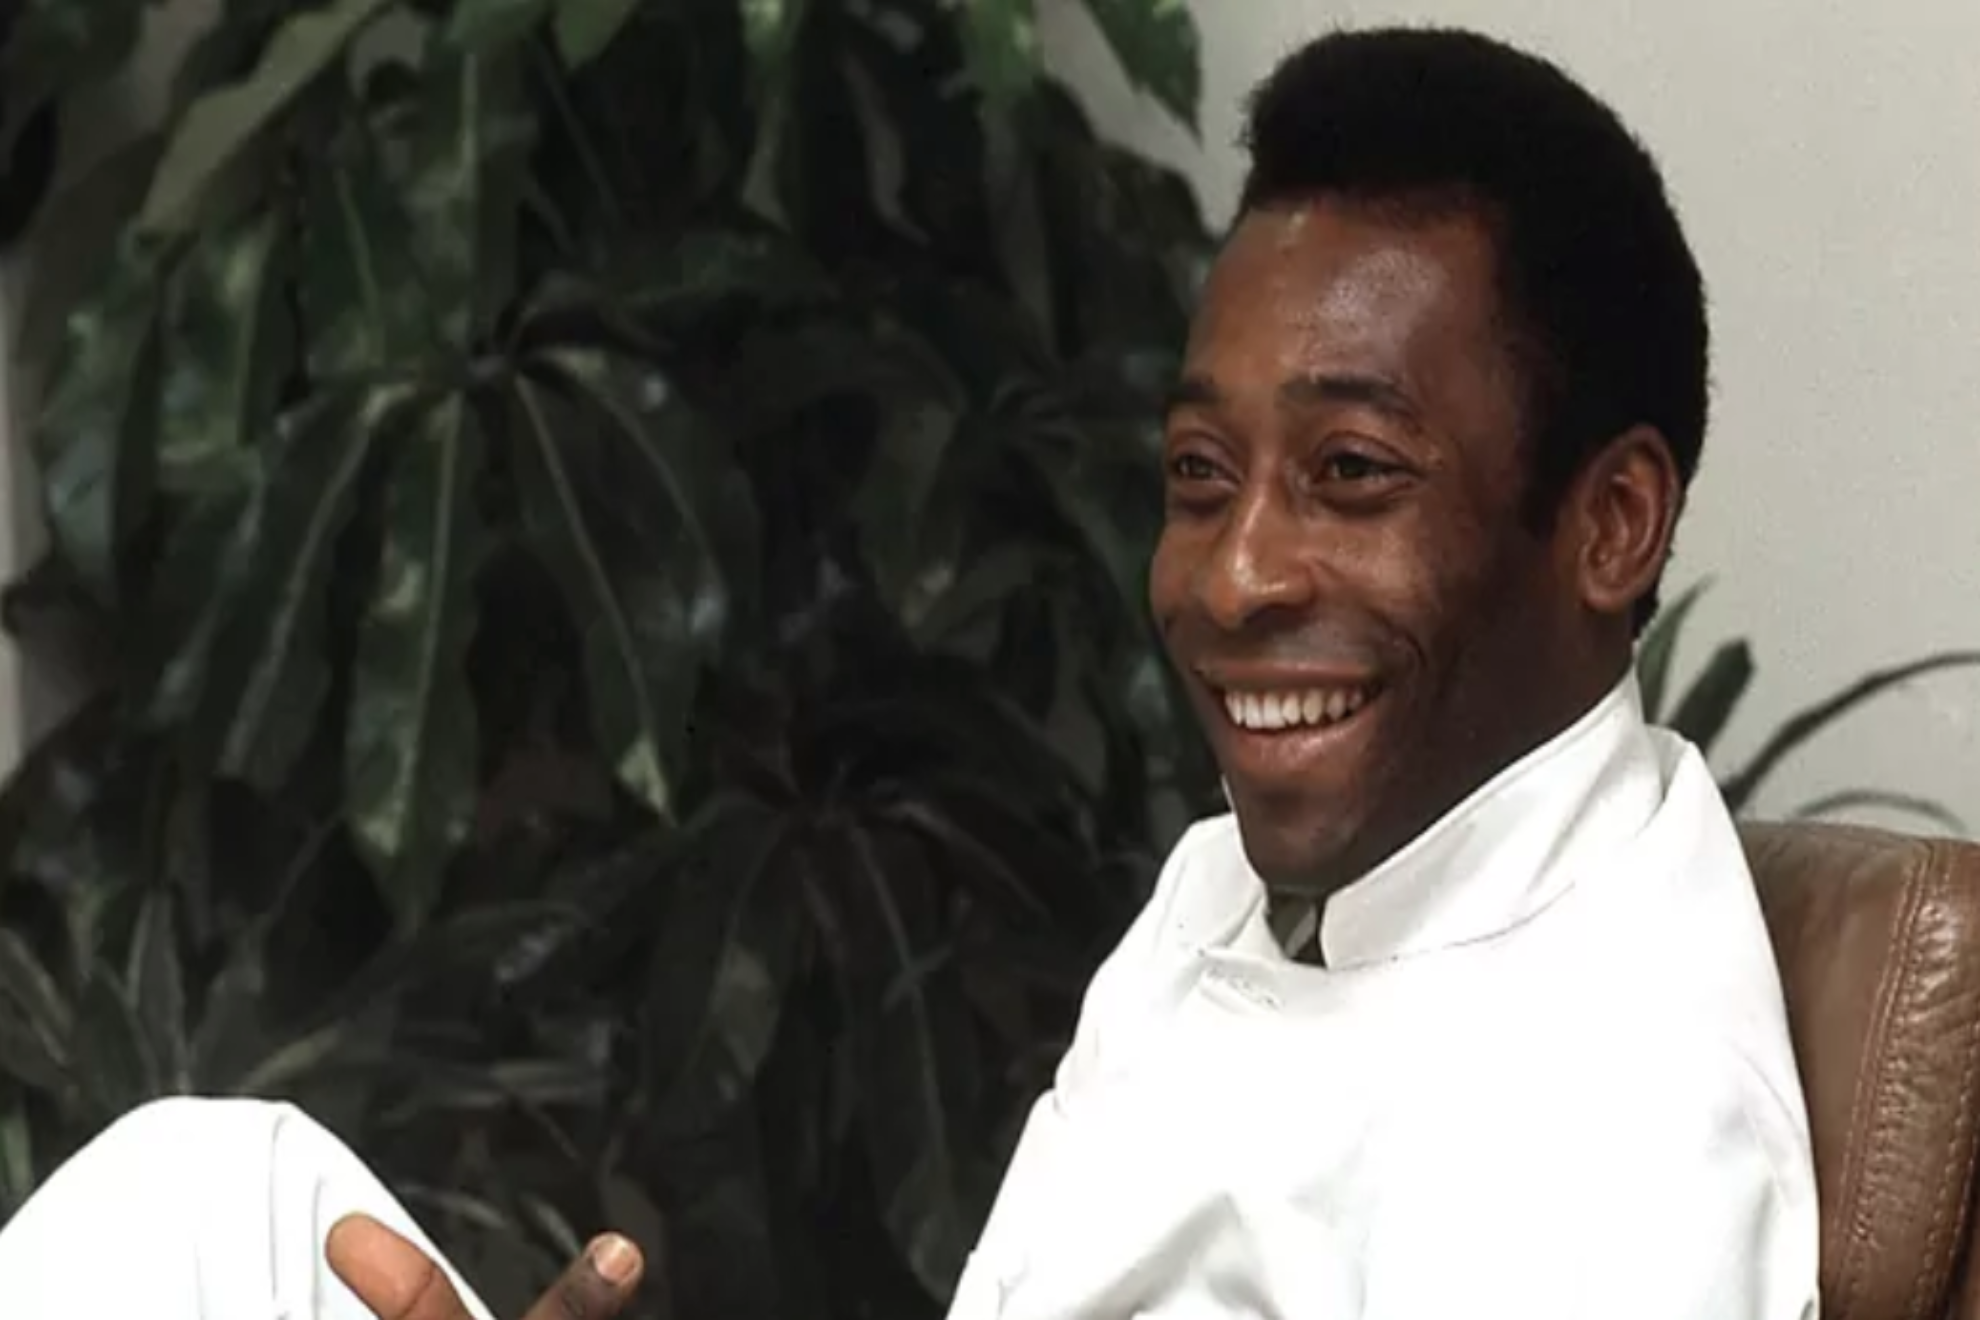 Pele's unrecognized daughter could be included in his inheritance